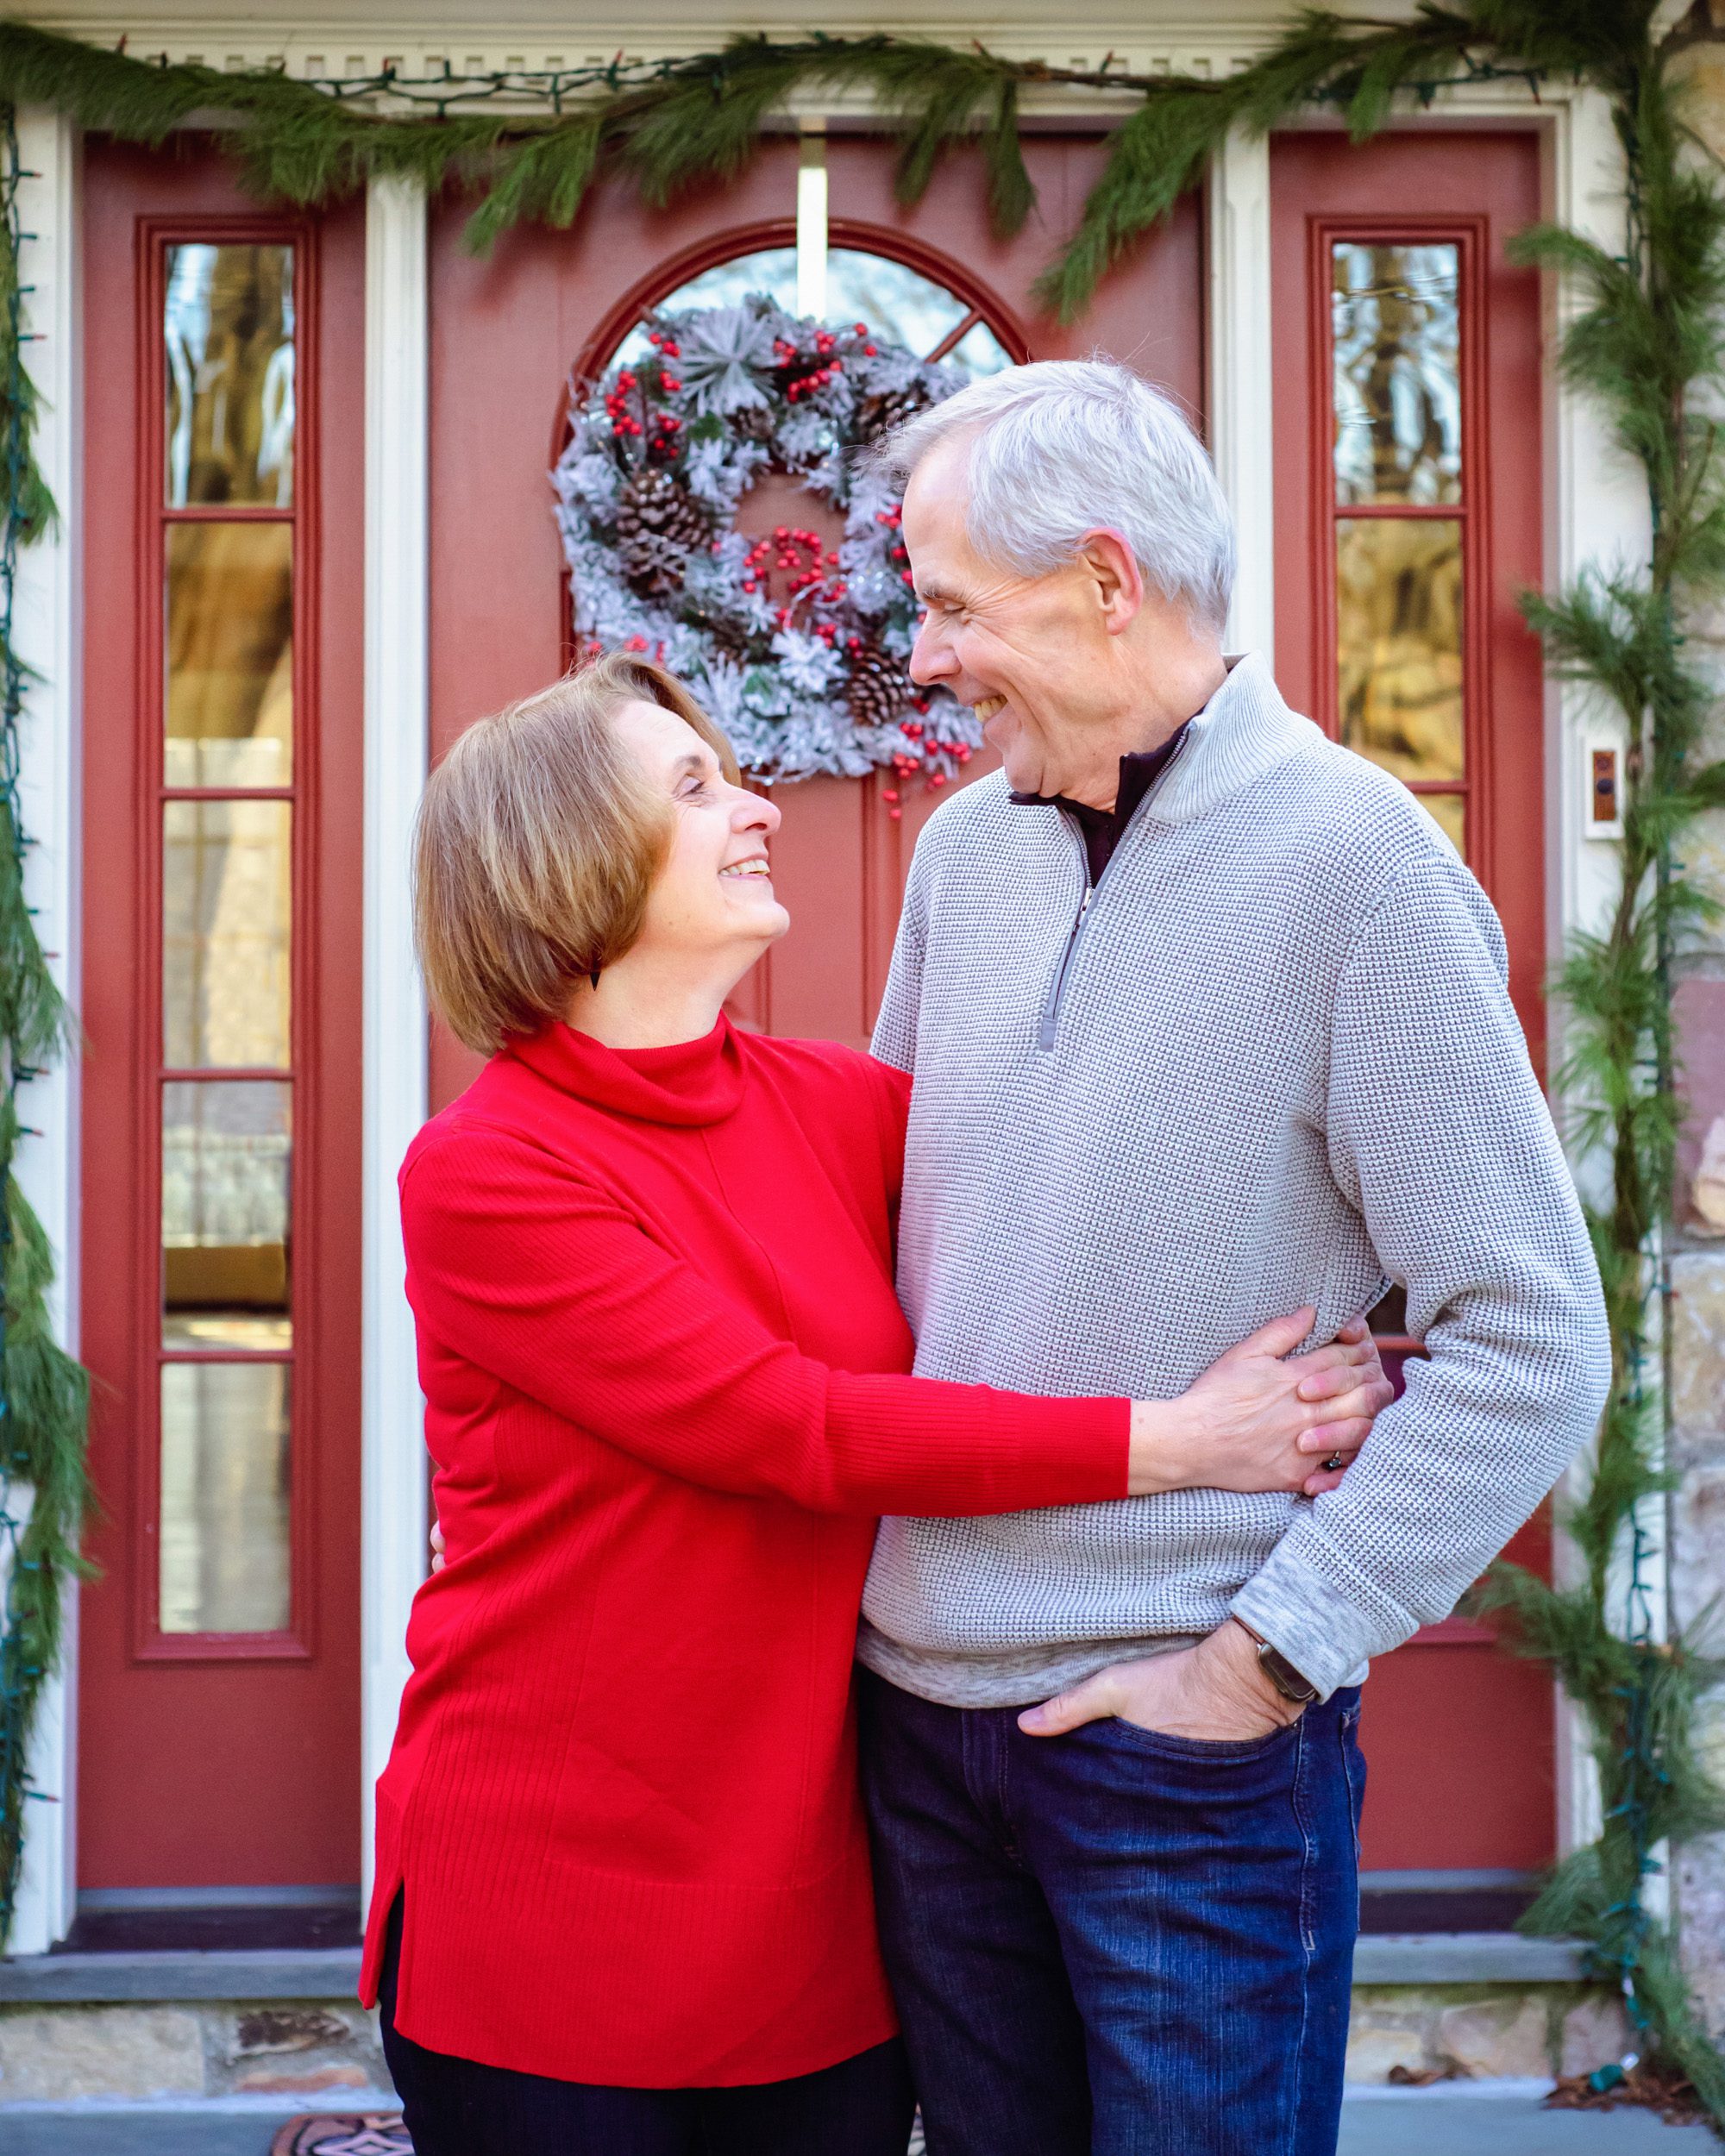 Grandparents standing in front of a red door hugging and smiling at each other during an extended family photoshoot